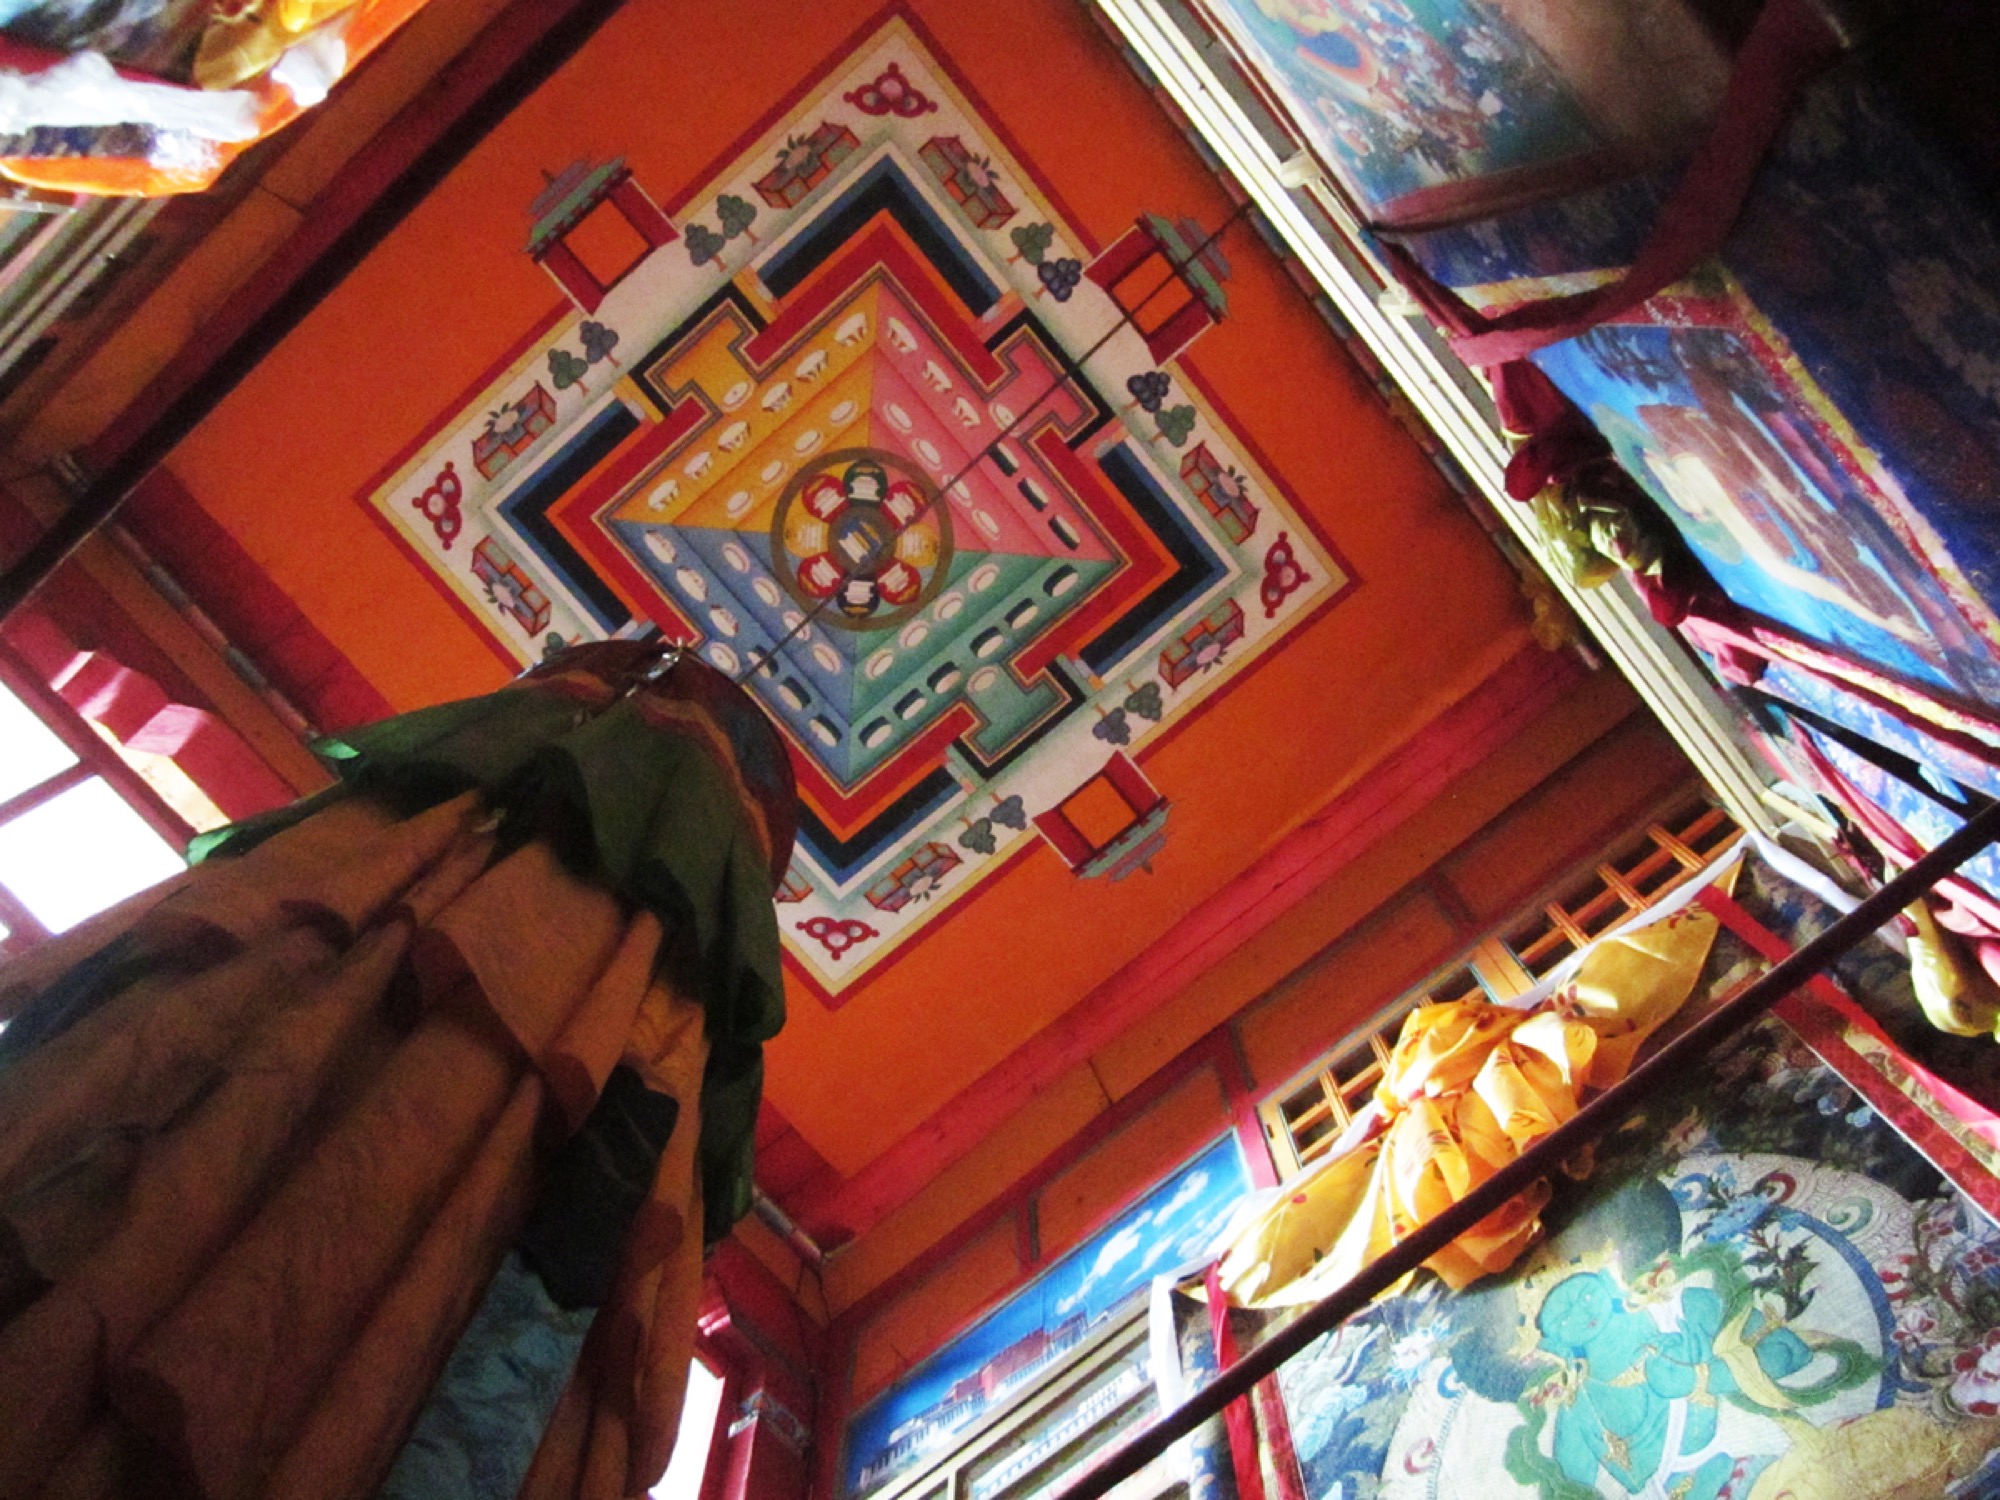 Photostory: Tibet, Towards the Roof of the World, by Arghya Ghosh 47